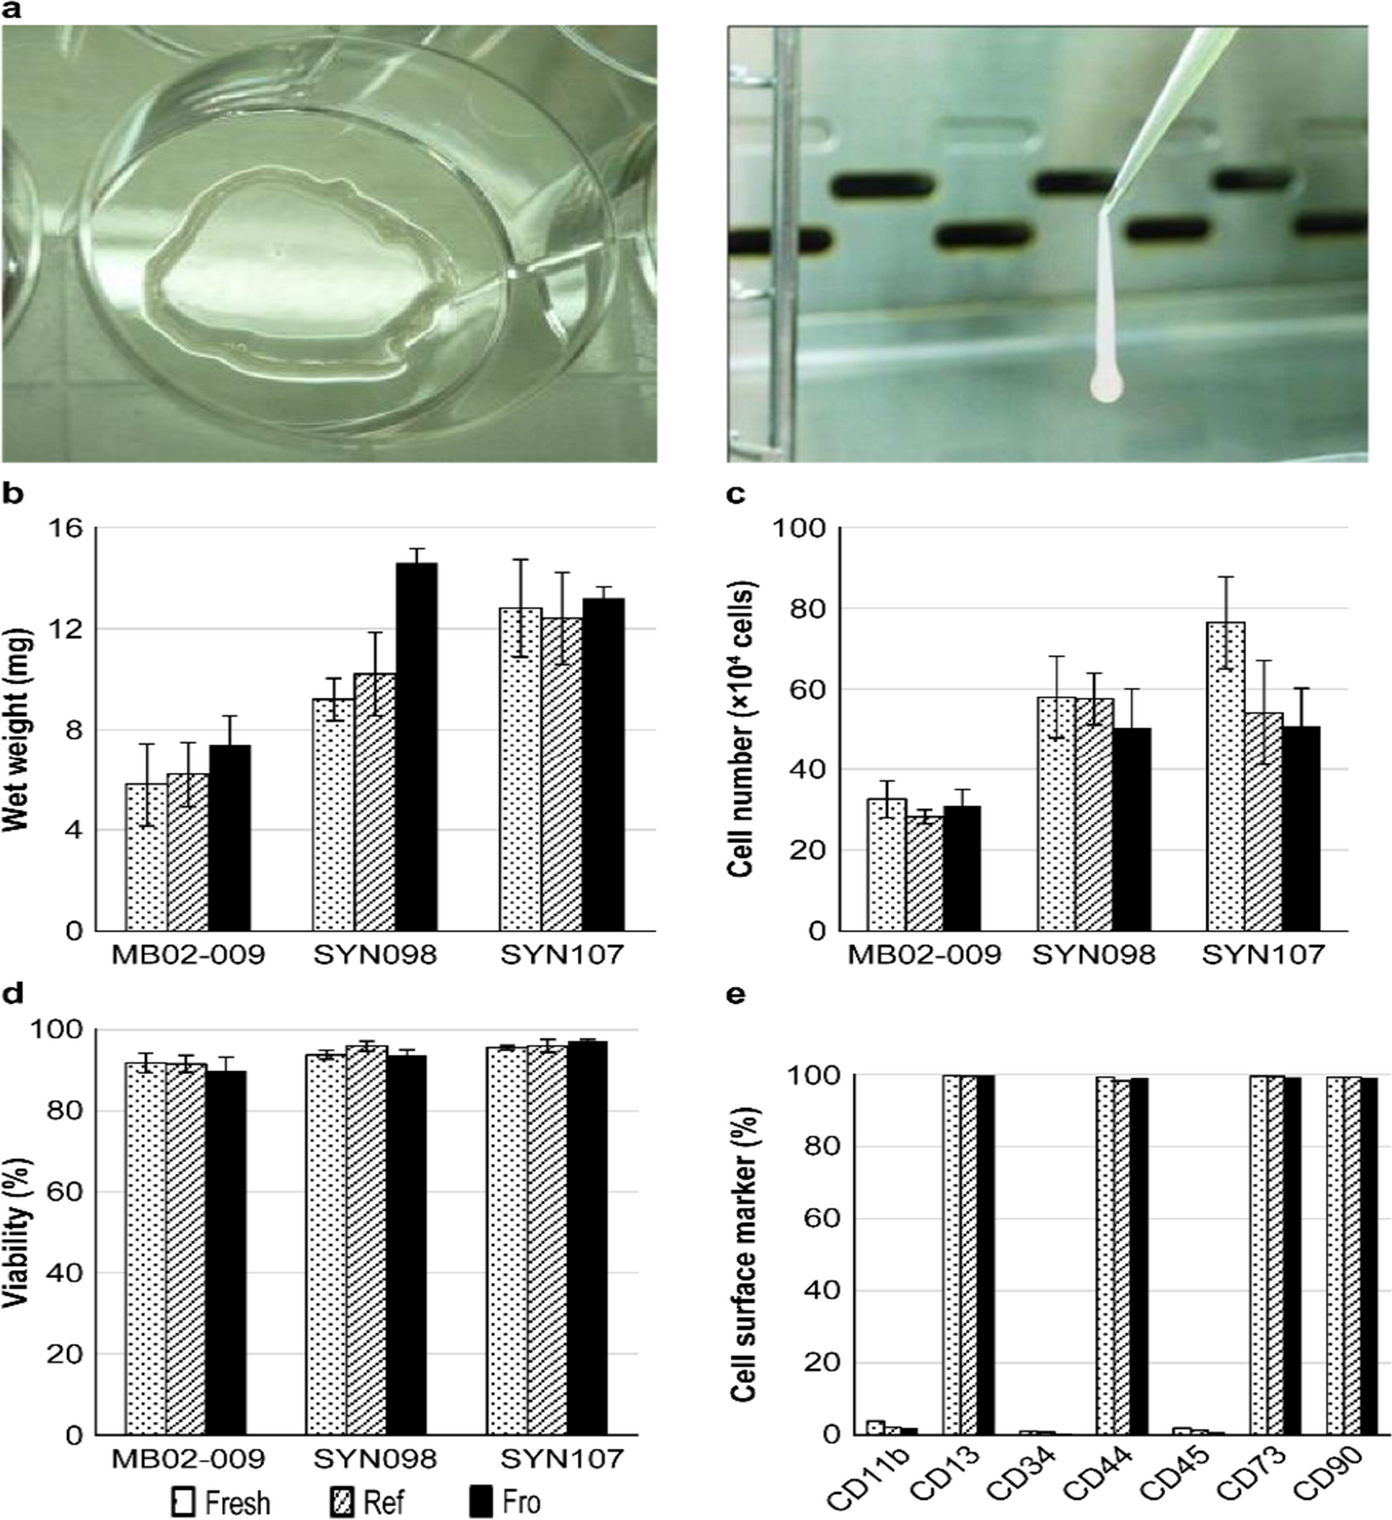 Development of scaffold-free tissue-engineered constructs derived from mesenchymal stem cells with serum-free media for cartilage repair and long-term preservation